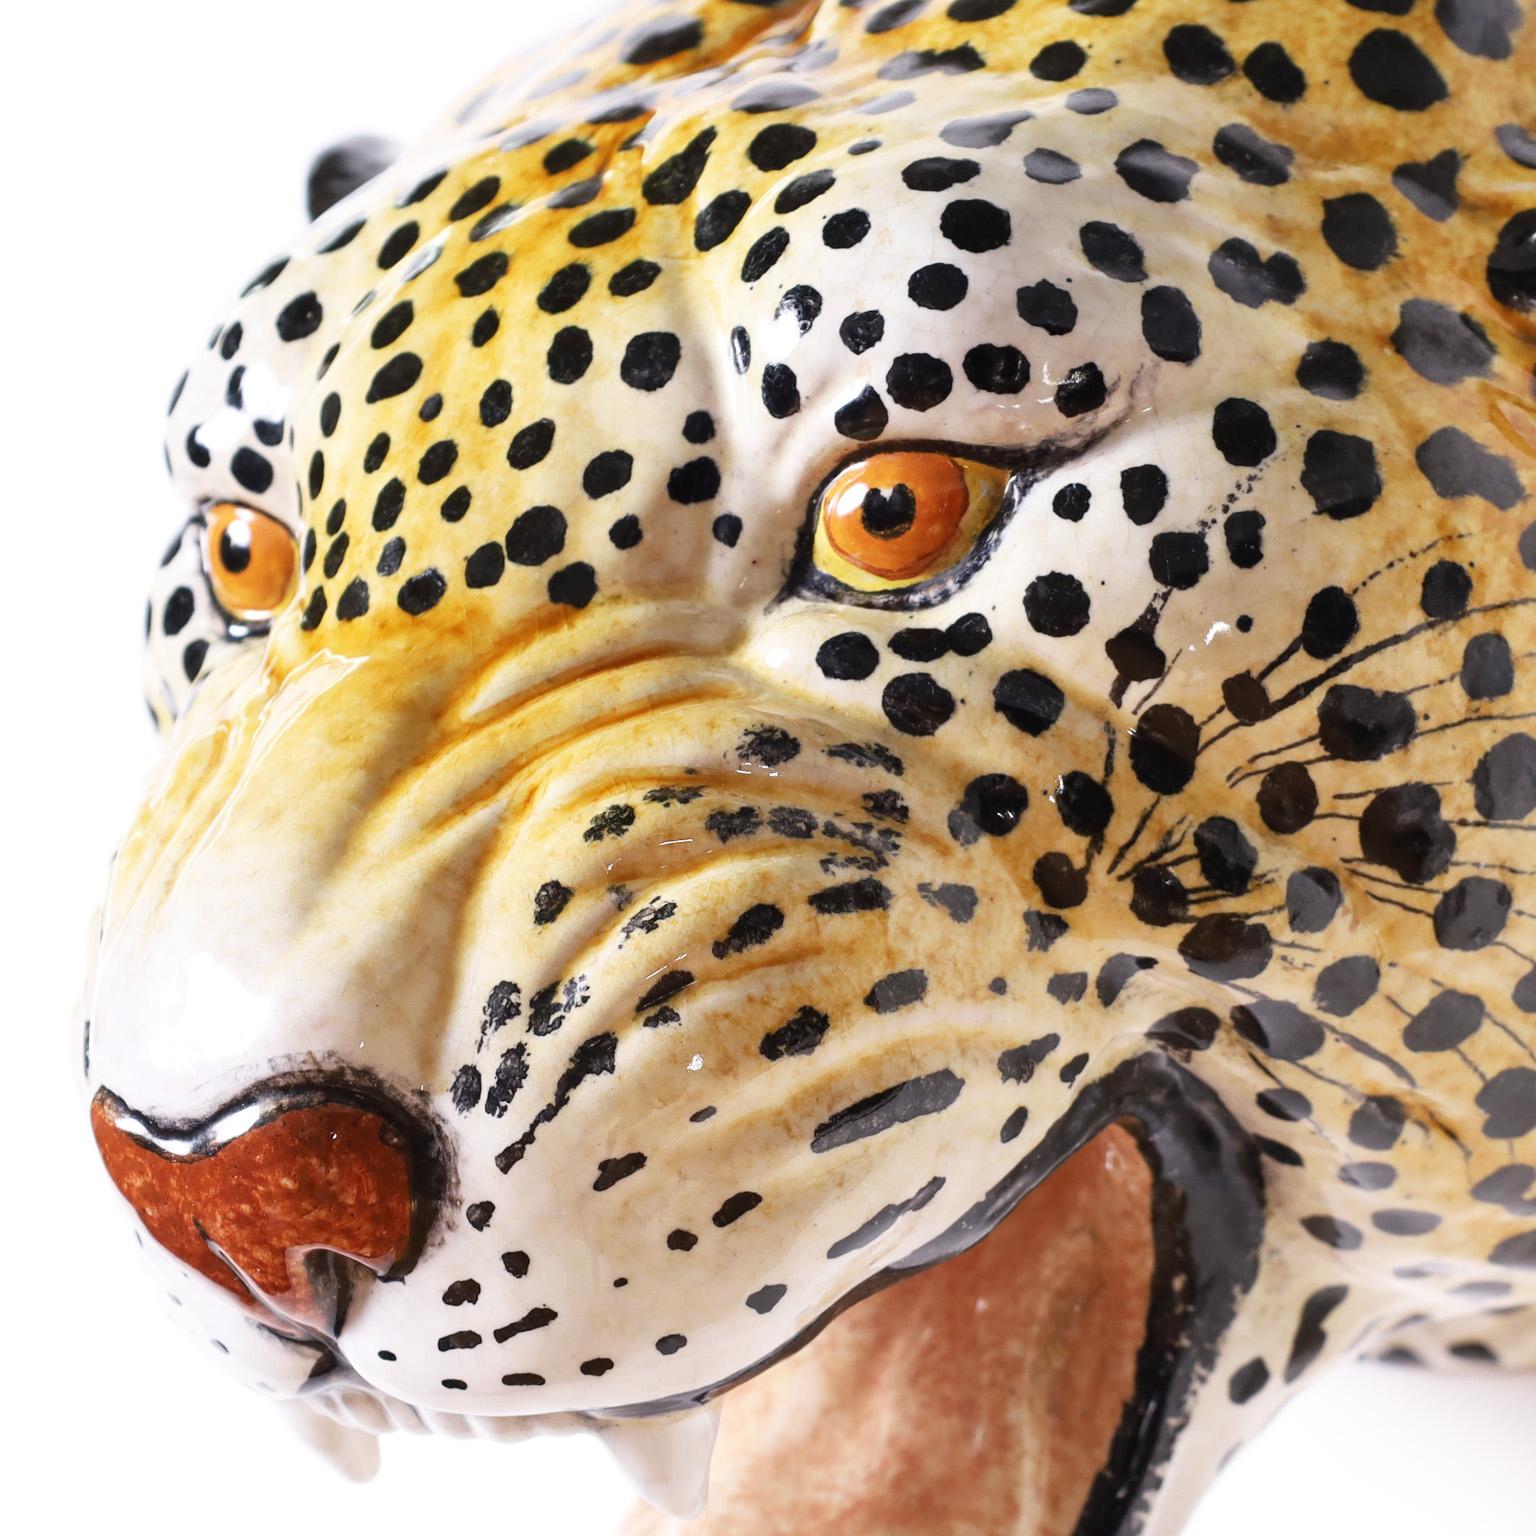 One of mother nature's most iconic designs, the big cat. Here we present a terra cotta wall mounted head decorated and glazed, a leopard depicted with amazing accuracy.